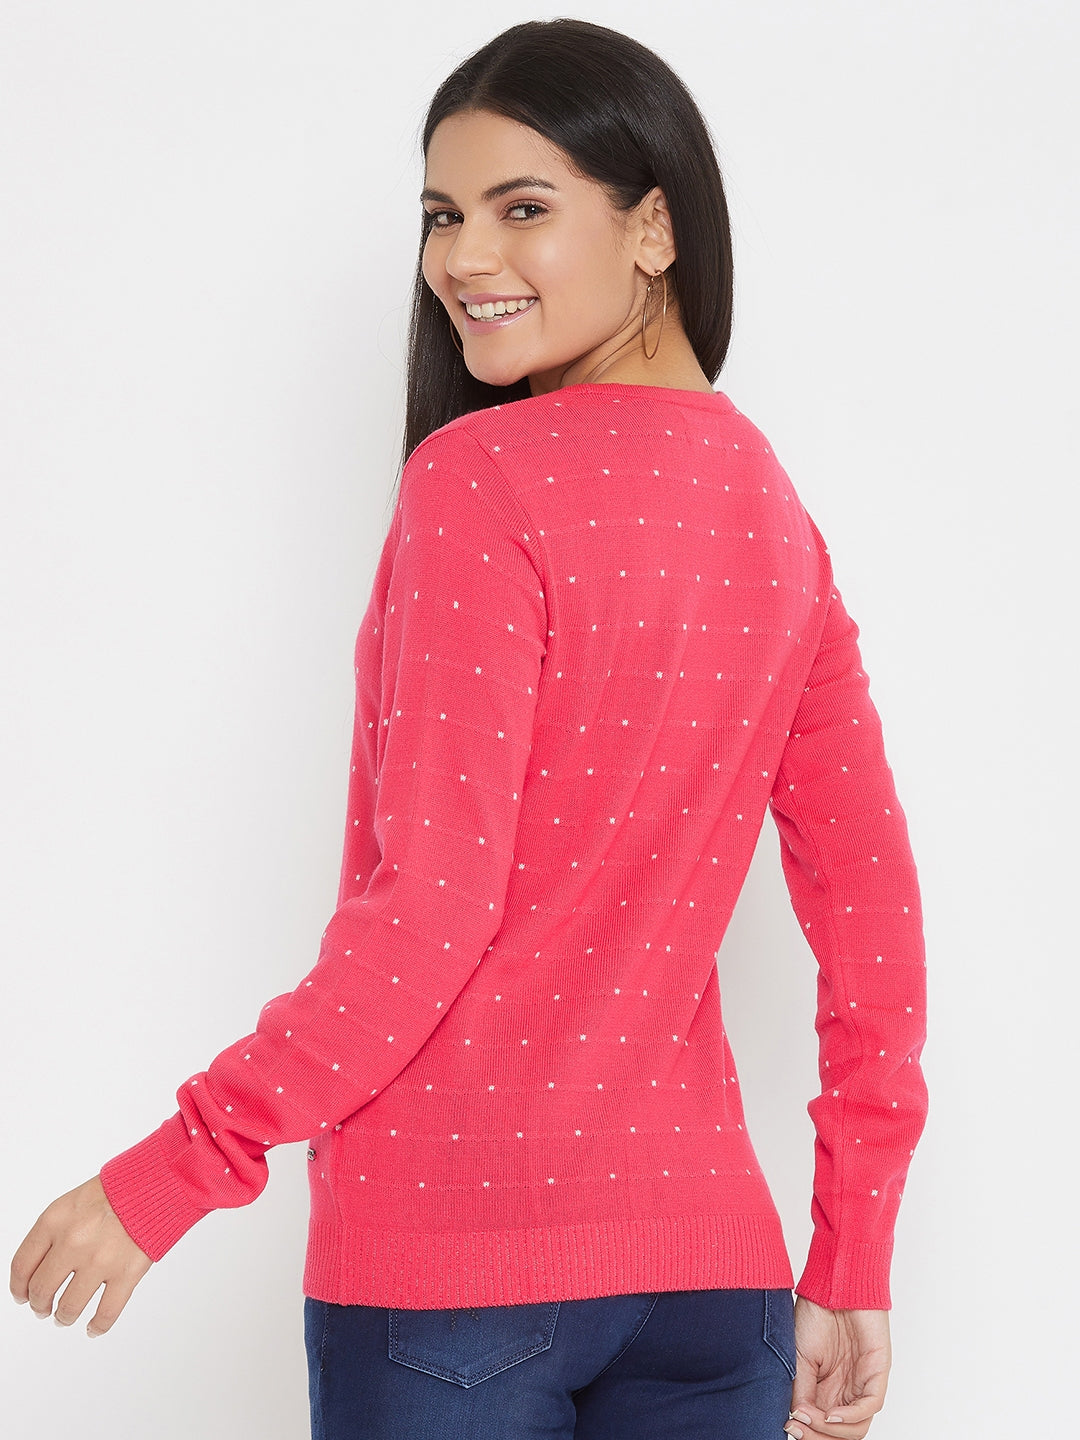 Pink Printed Round Neck Sweater - Women Sweaters